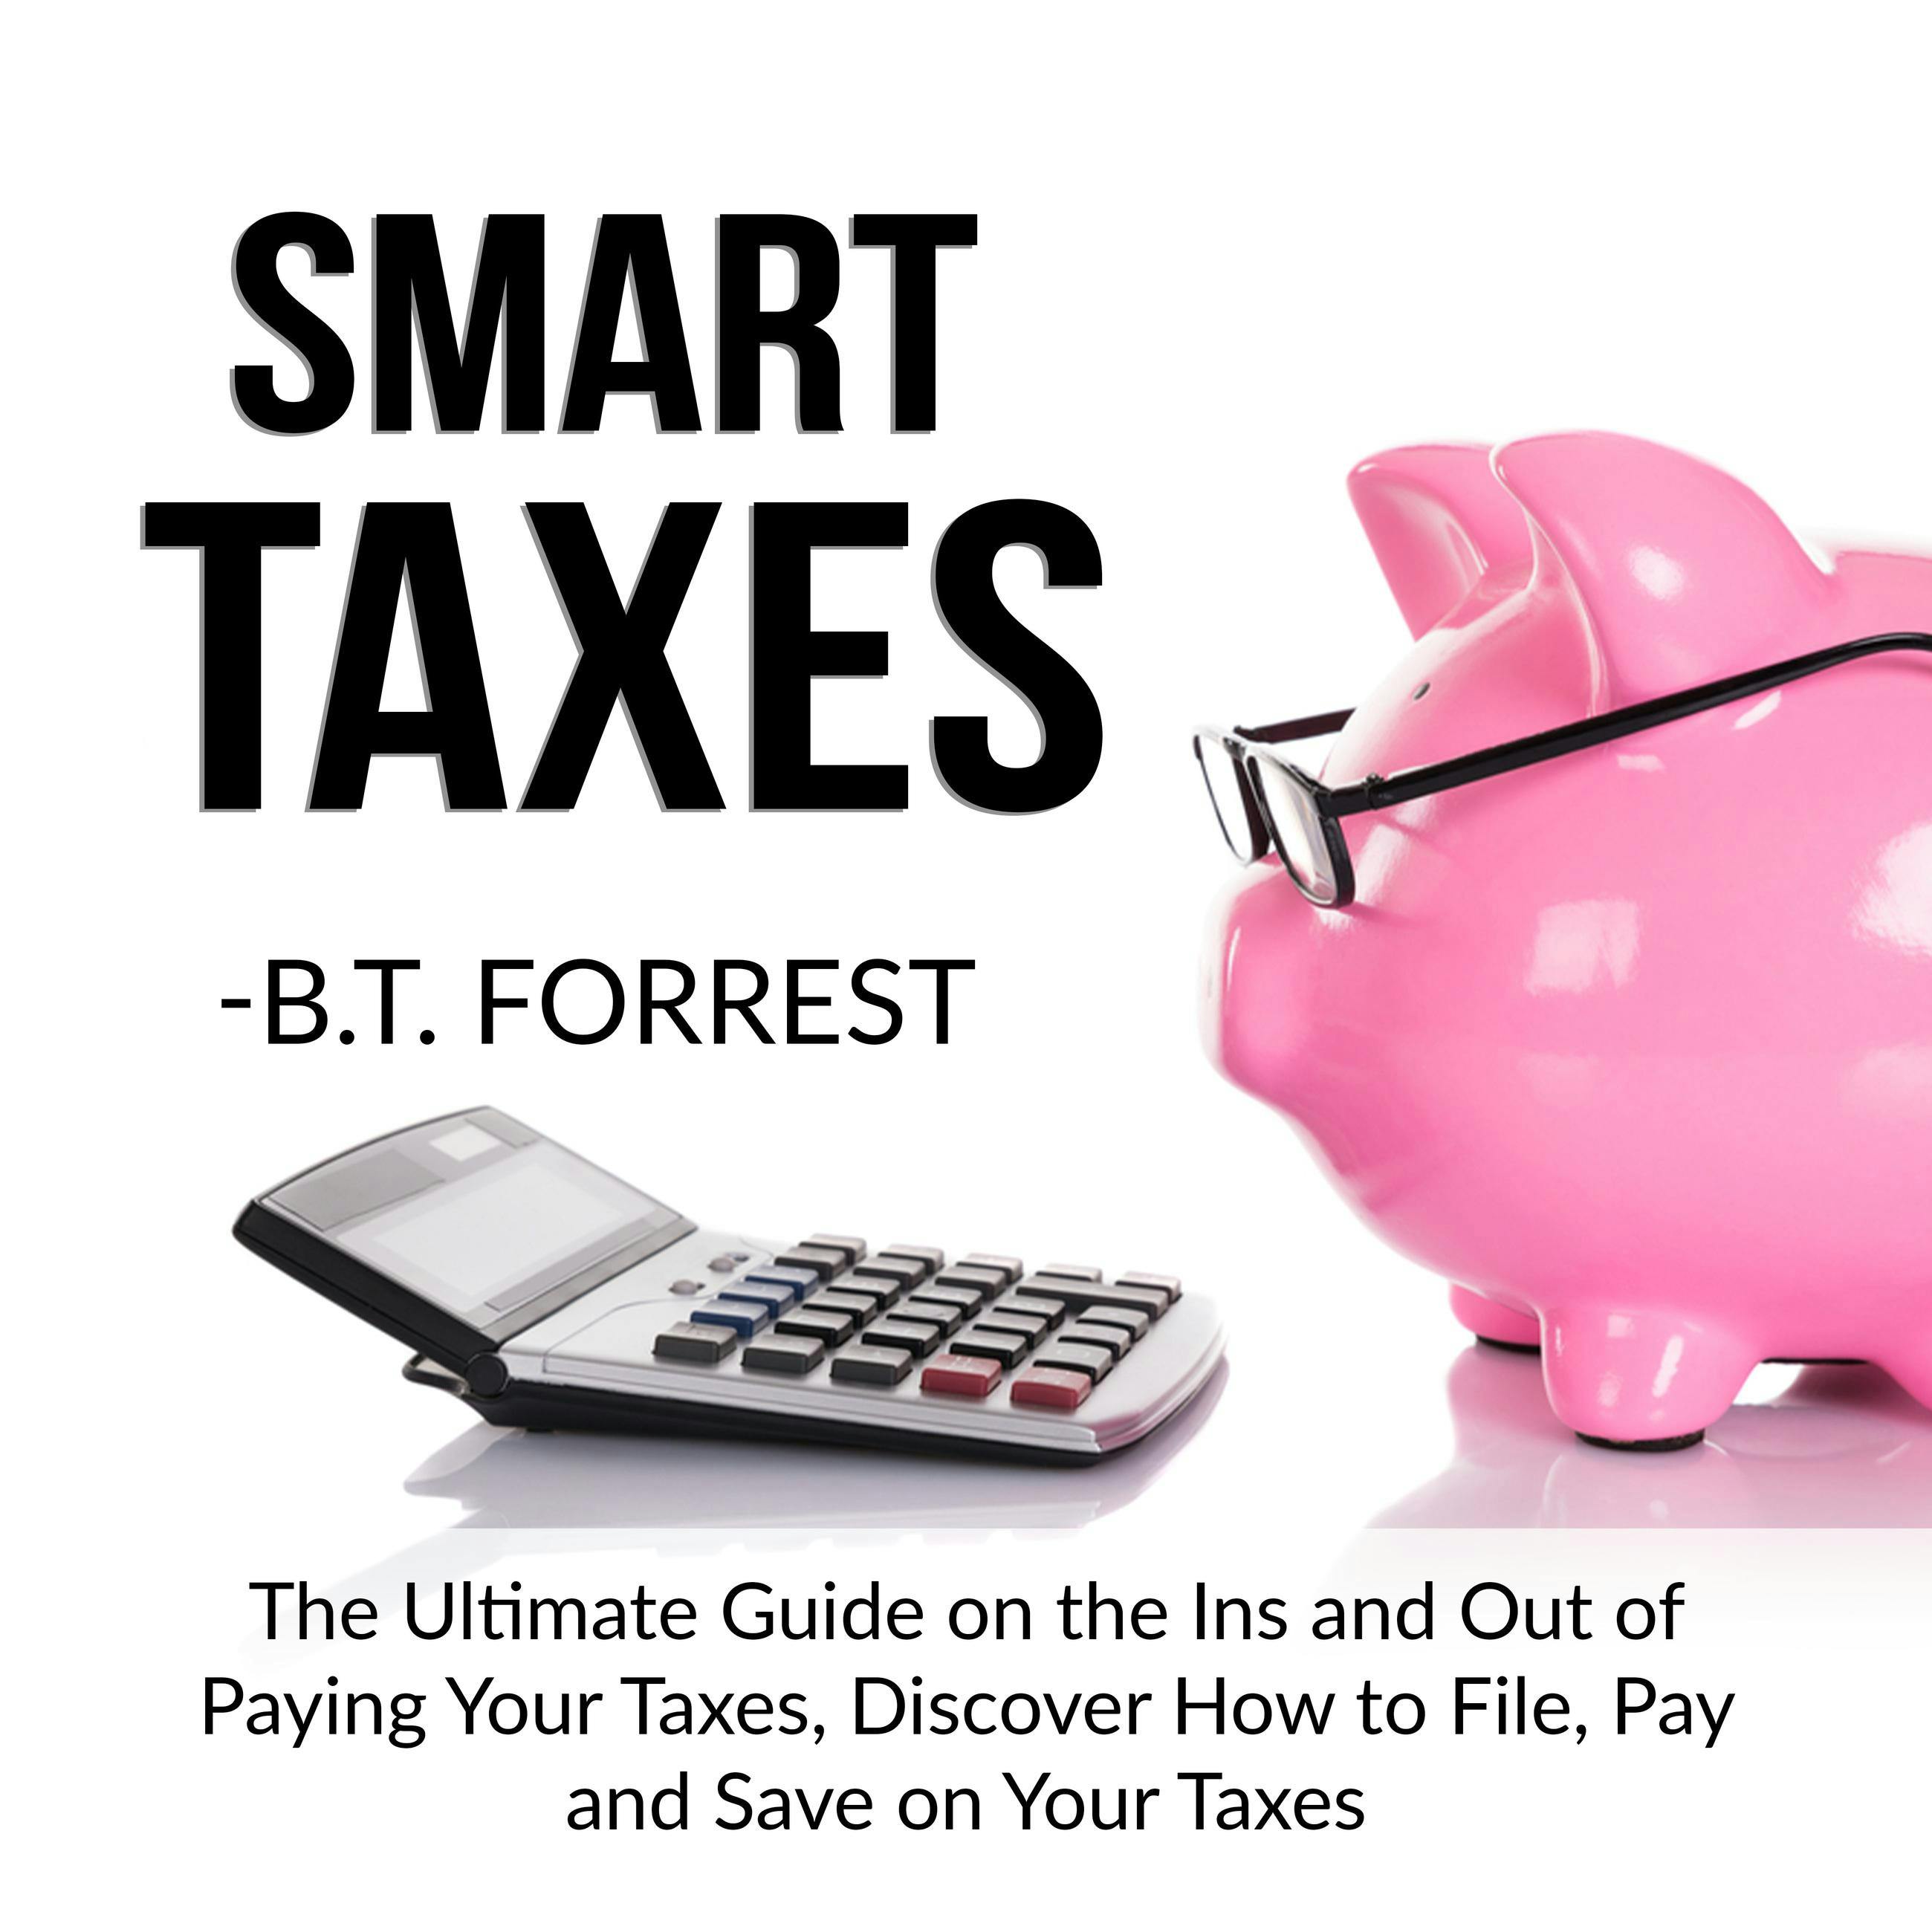 Smart Taxes: The Ultimate Guide on the Ins and Out of Paying Your Taxes, Discover How to File, Pay and Save on Your Taxes - B.T. Forrest